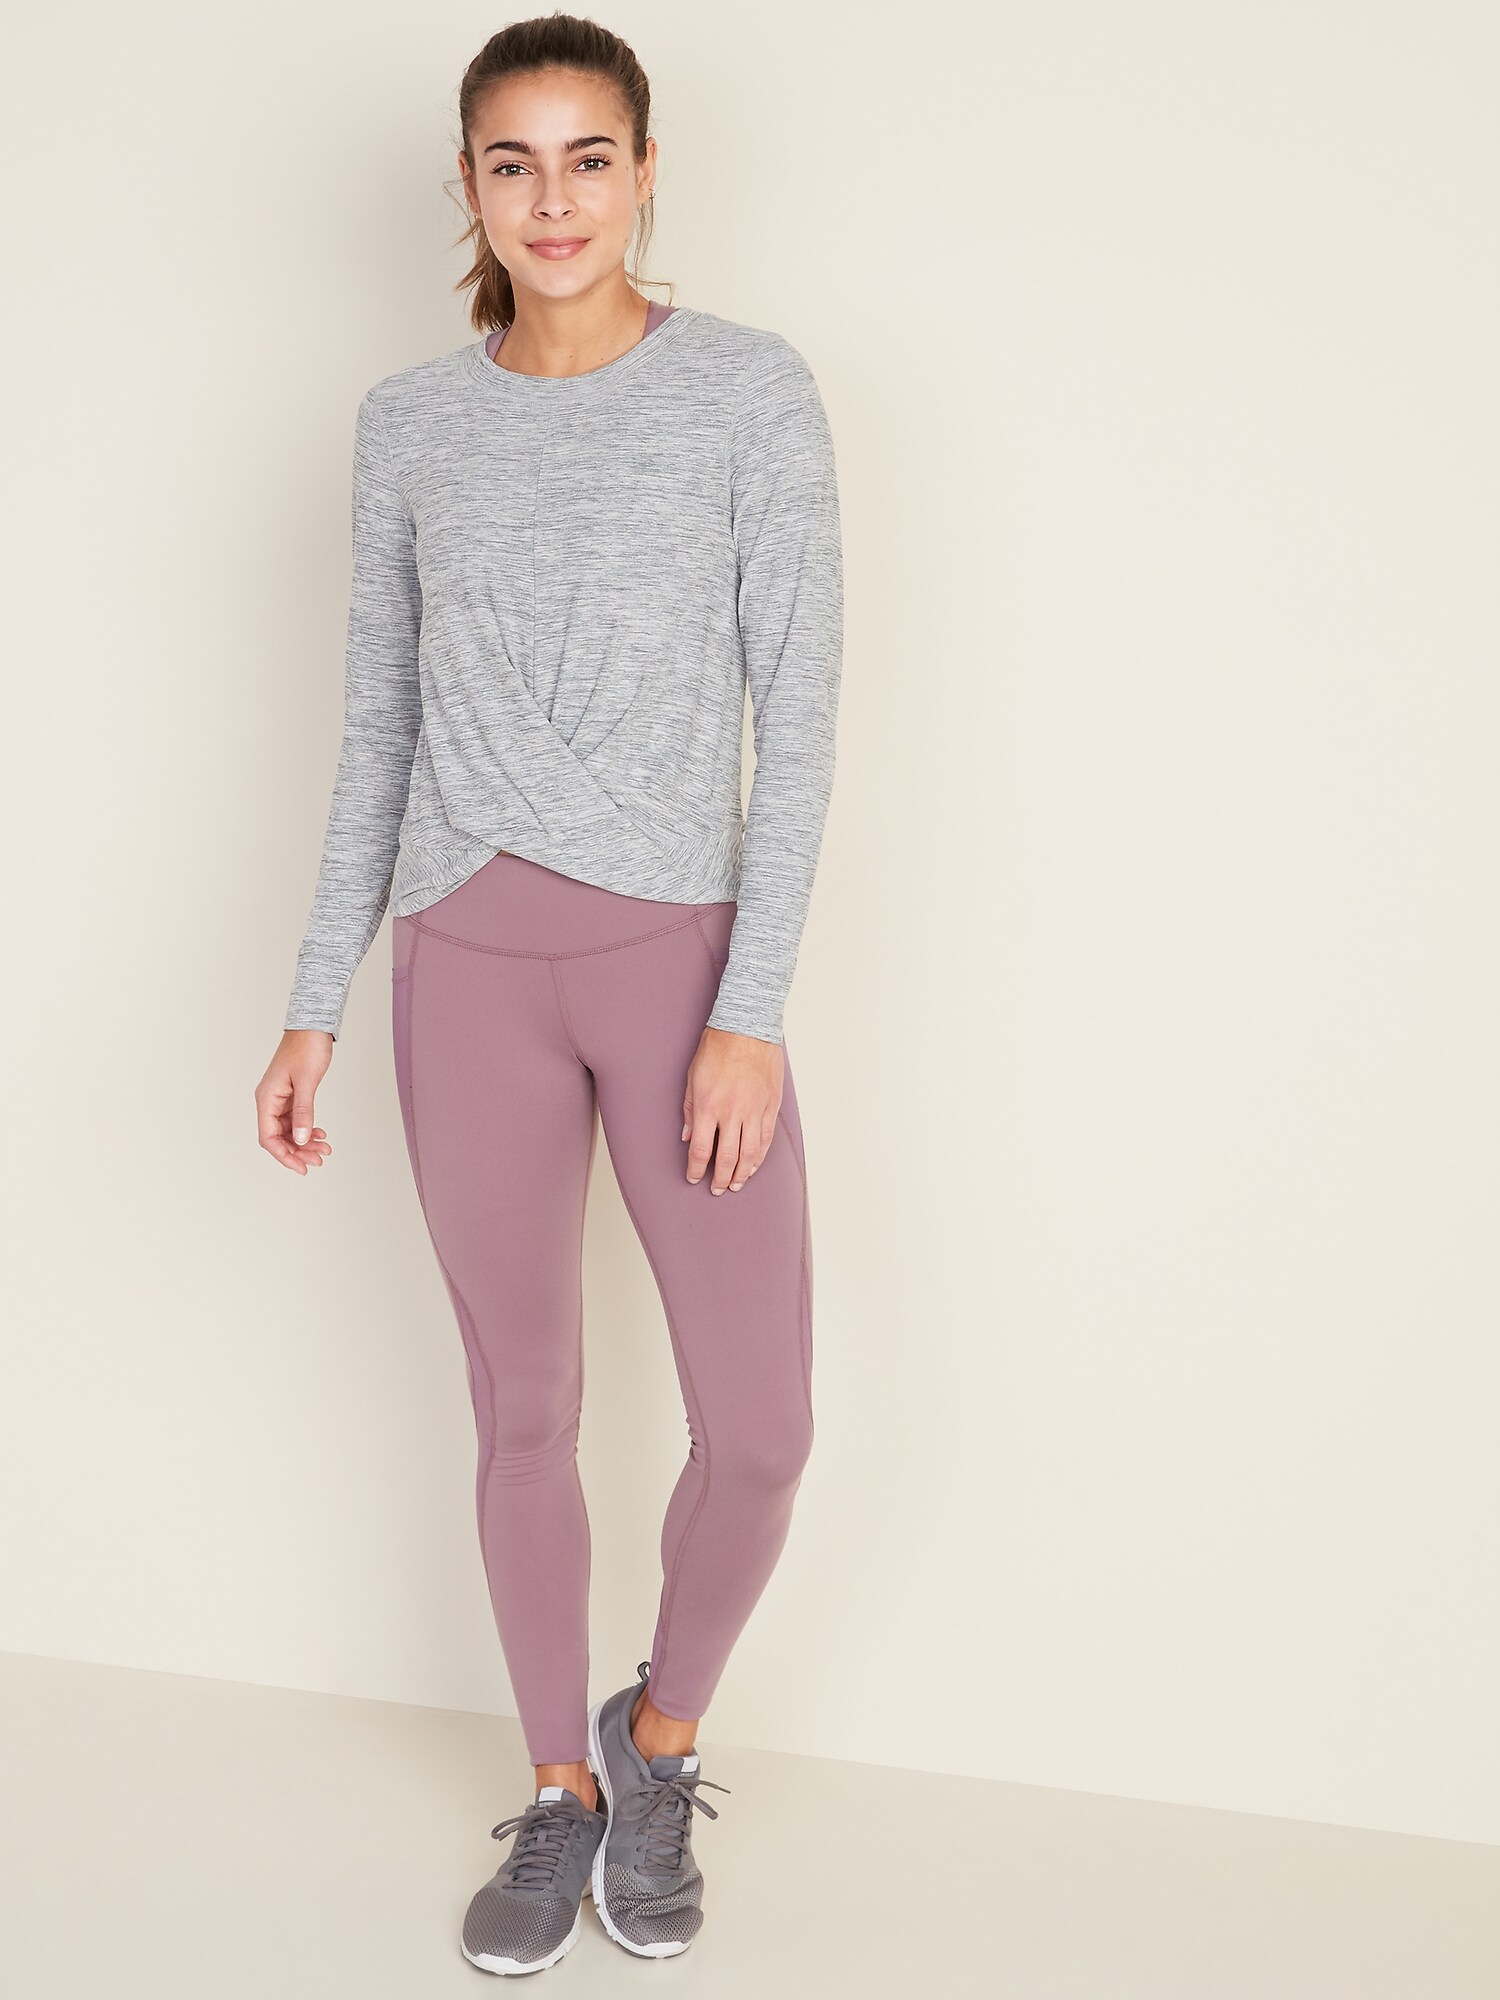 Relaxed Breathe ON Twist-Hem Cropped Top for Women | Old Navy